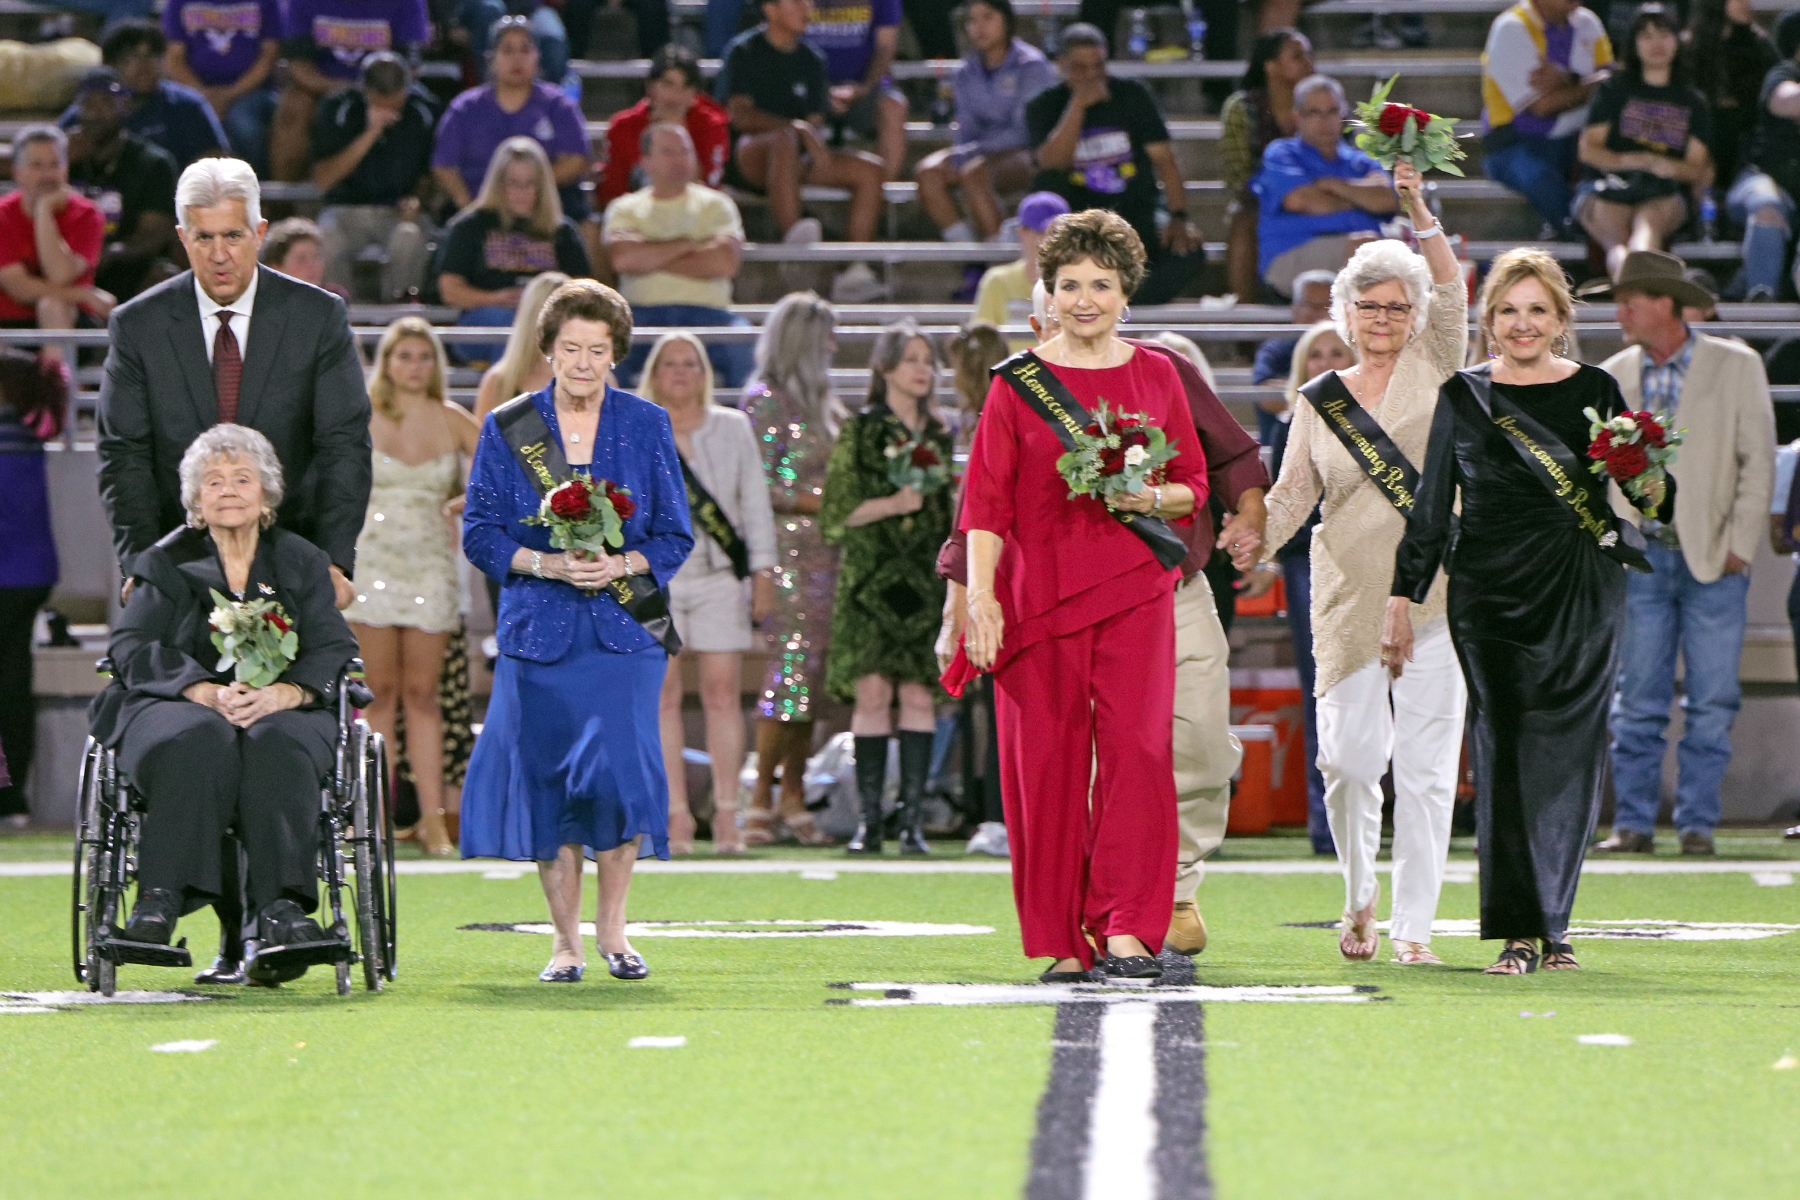 Cy-Fair HS Honors Rich History with Homecoming Queen Reunion